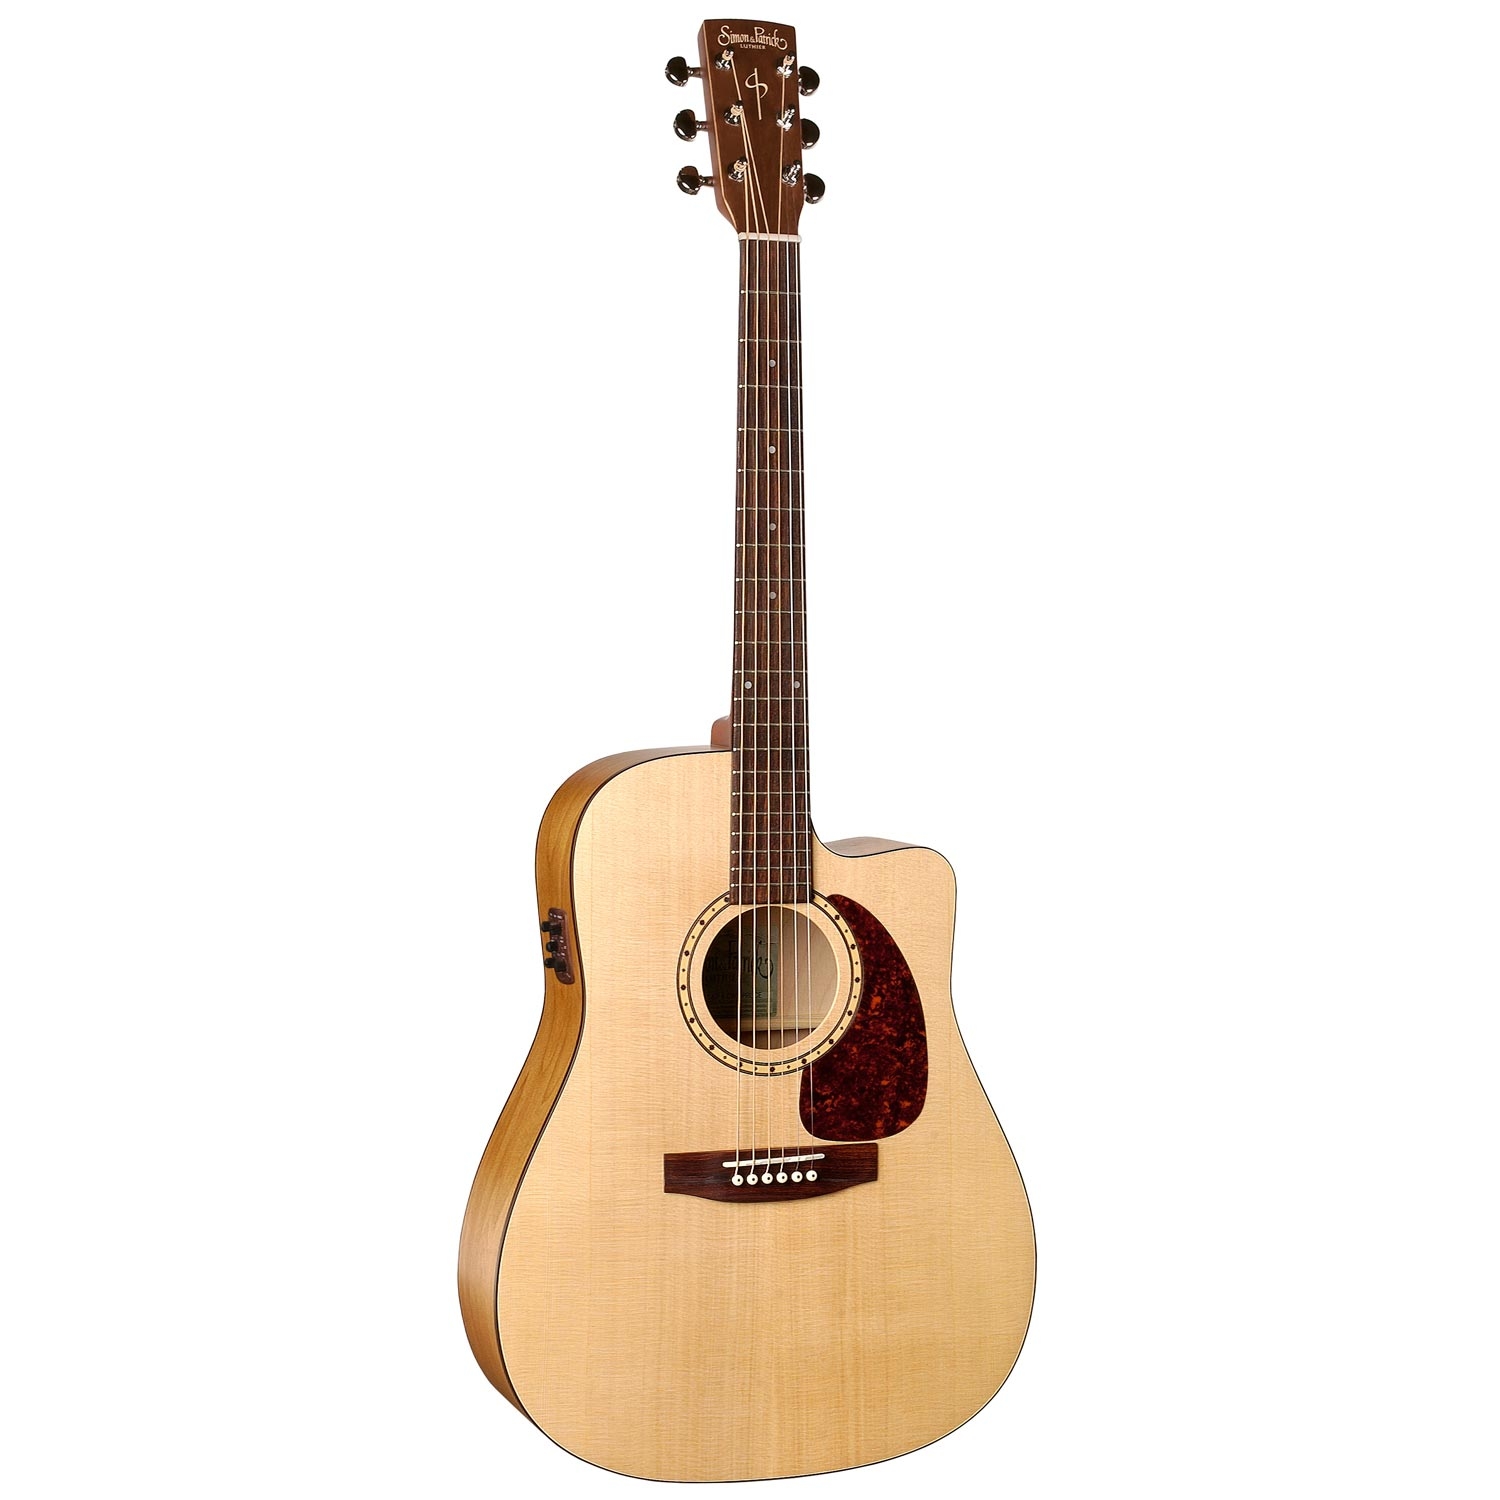 Simon & Patrick Woodland Cutaway Spruce Natural A3T Electric - Acoustic Guitar